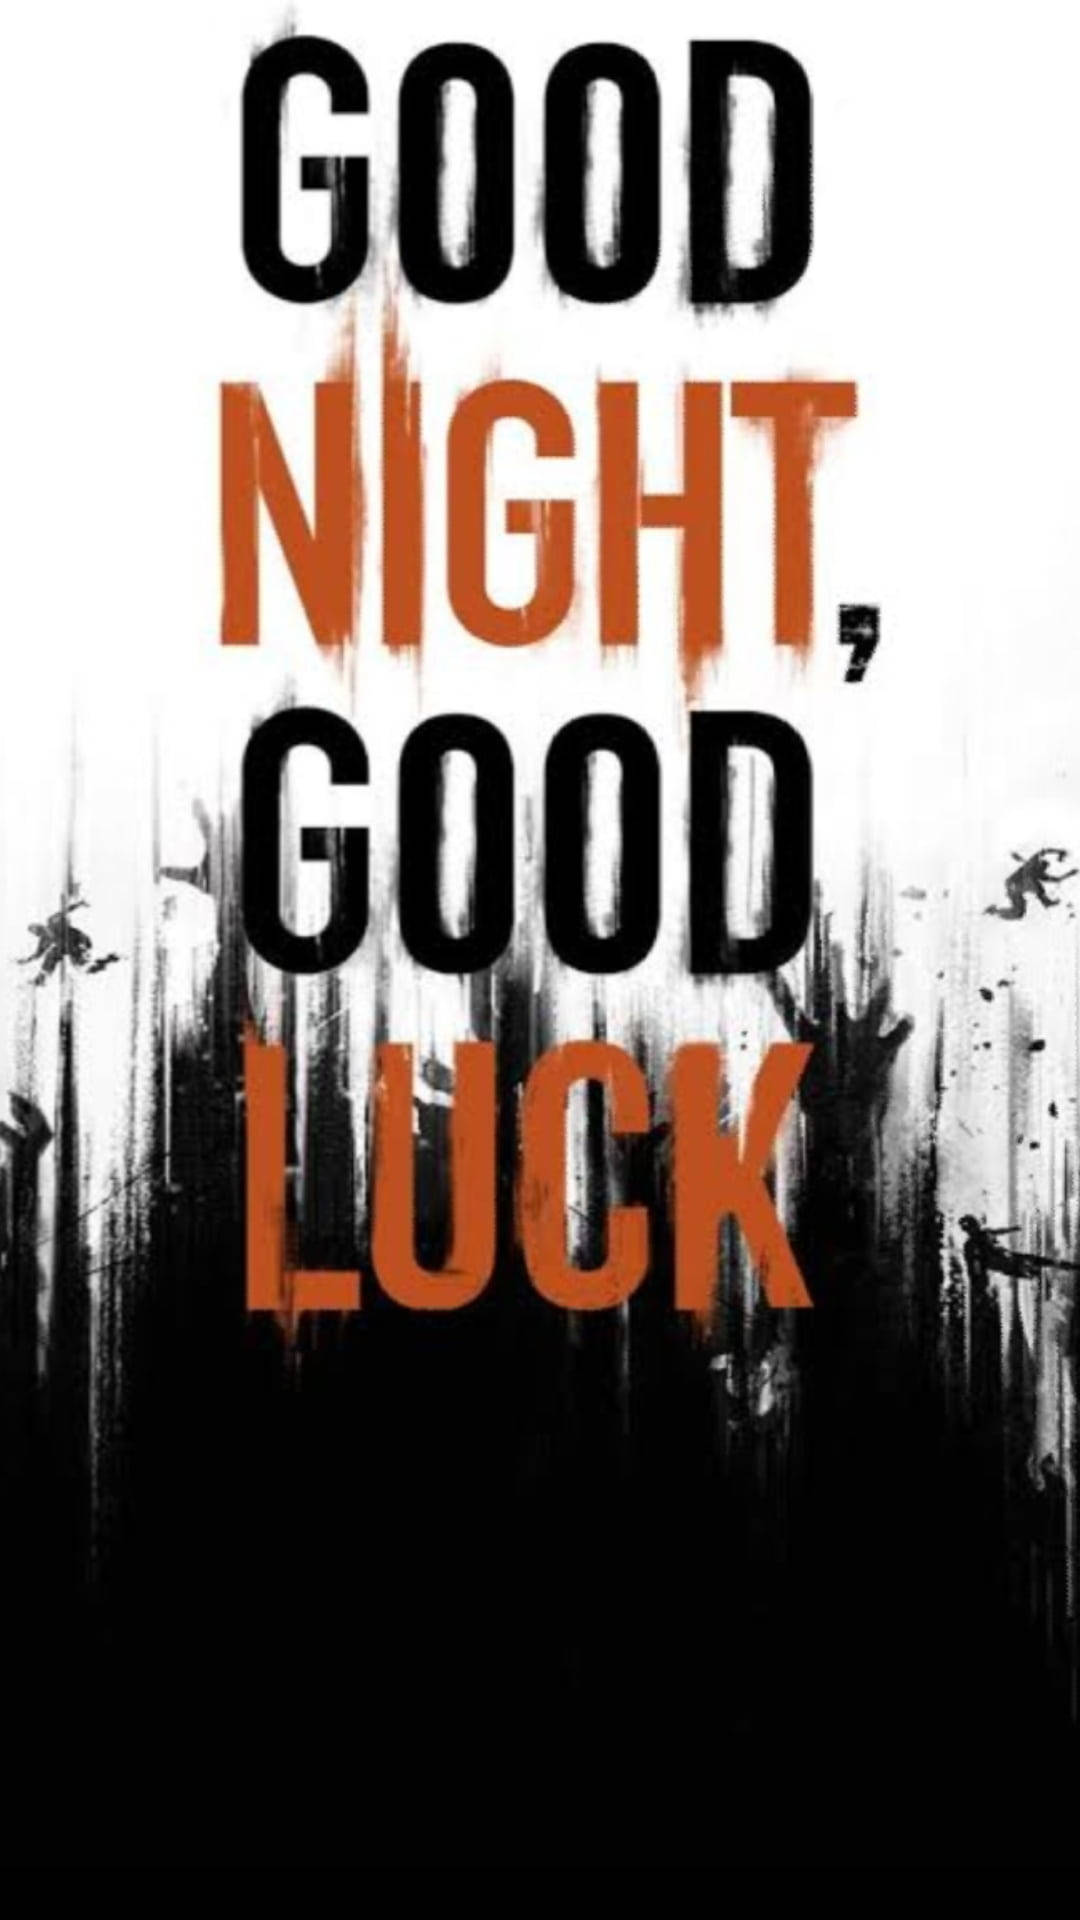 Good Night And Good Luck Background